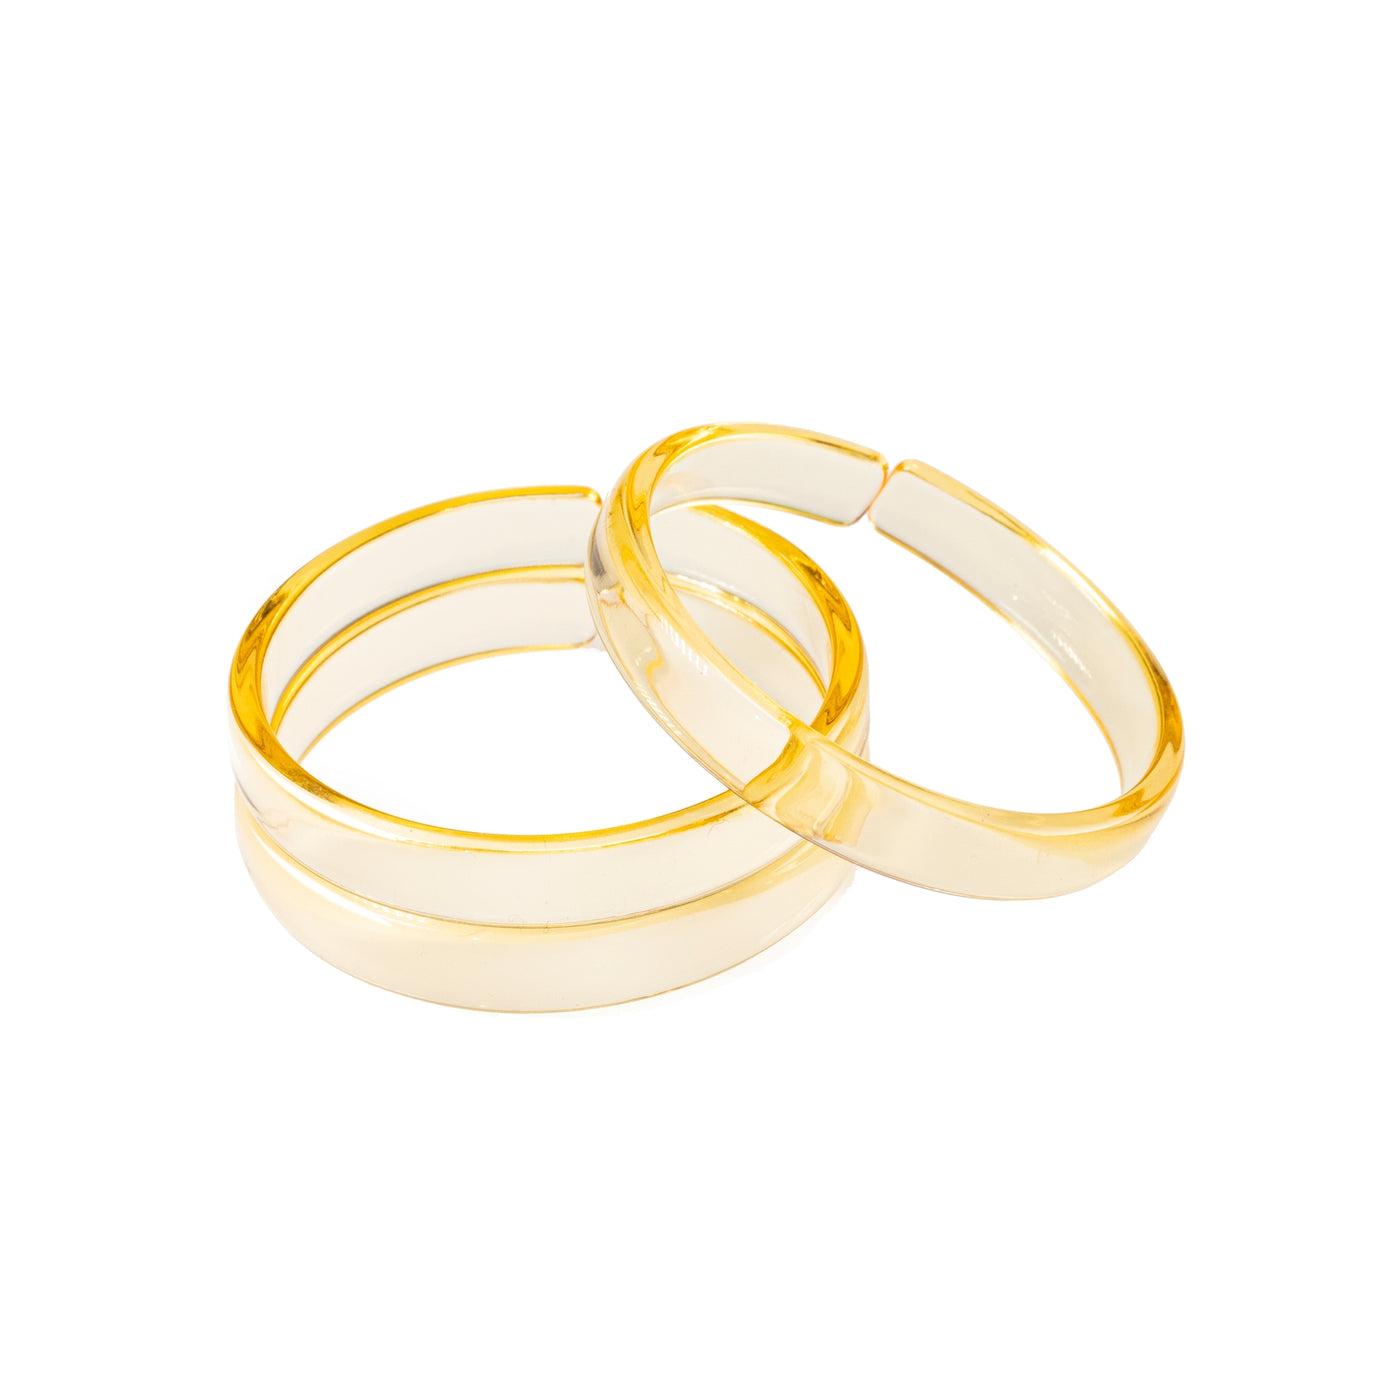 Clear Yellow Bangles (Set of 3)